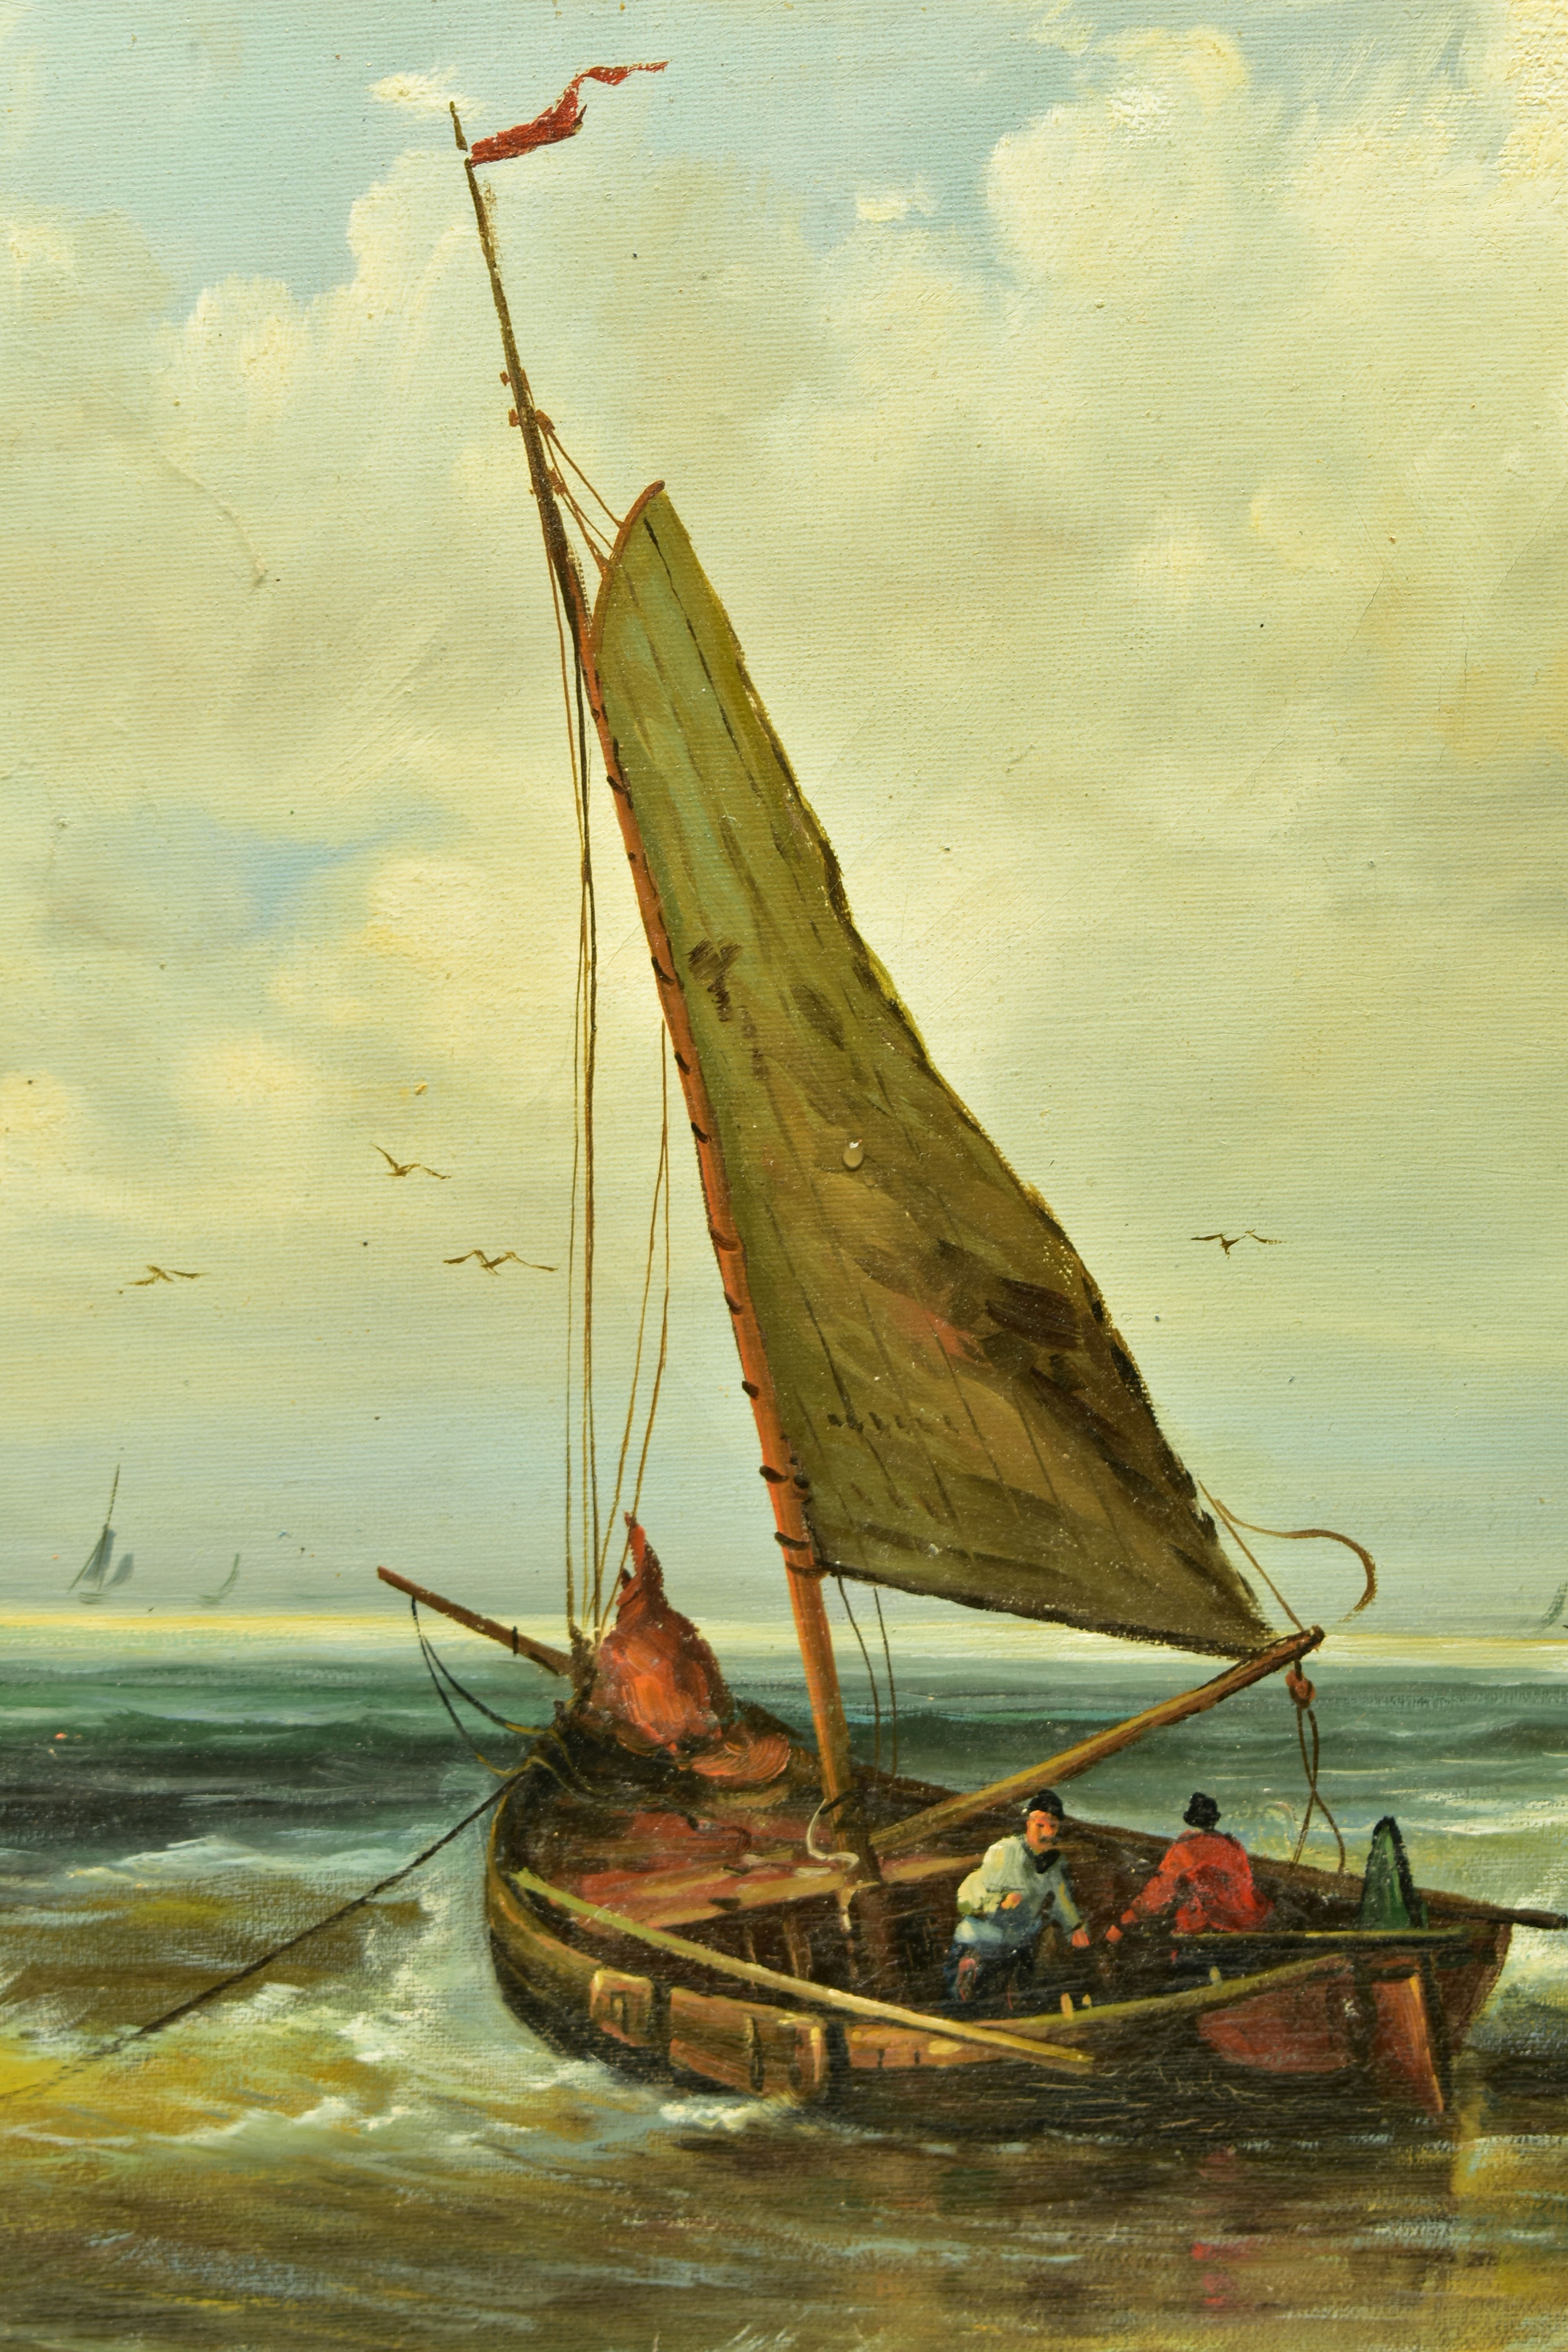 G MURPHY (20TH CENTURY) A NOSTALGIC MARITIME SCENE PAINTED IN A 19TH CENTURY STYLE, depicting - Image 3 of 7